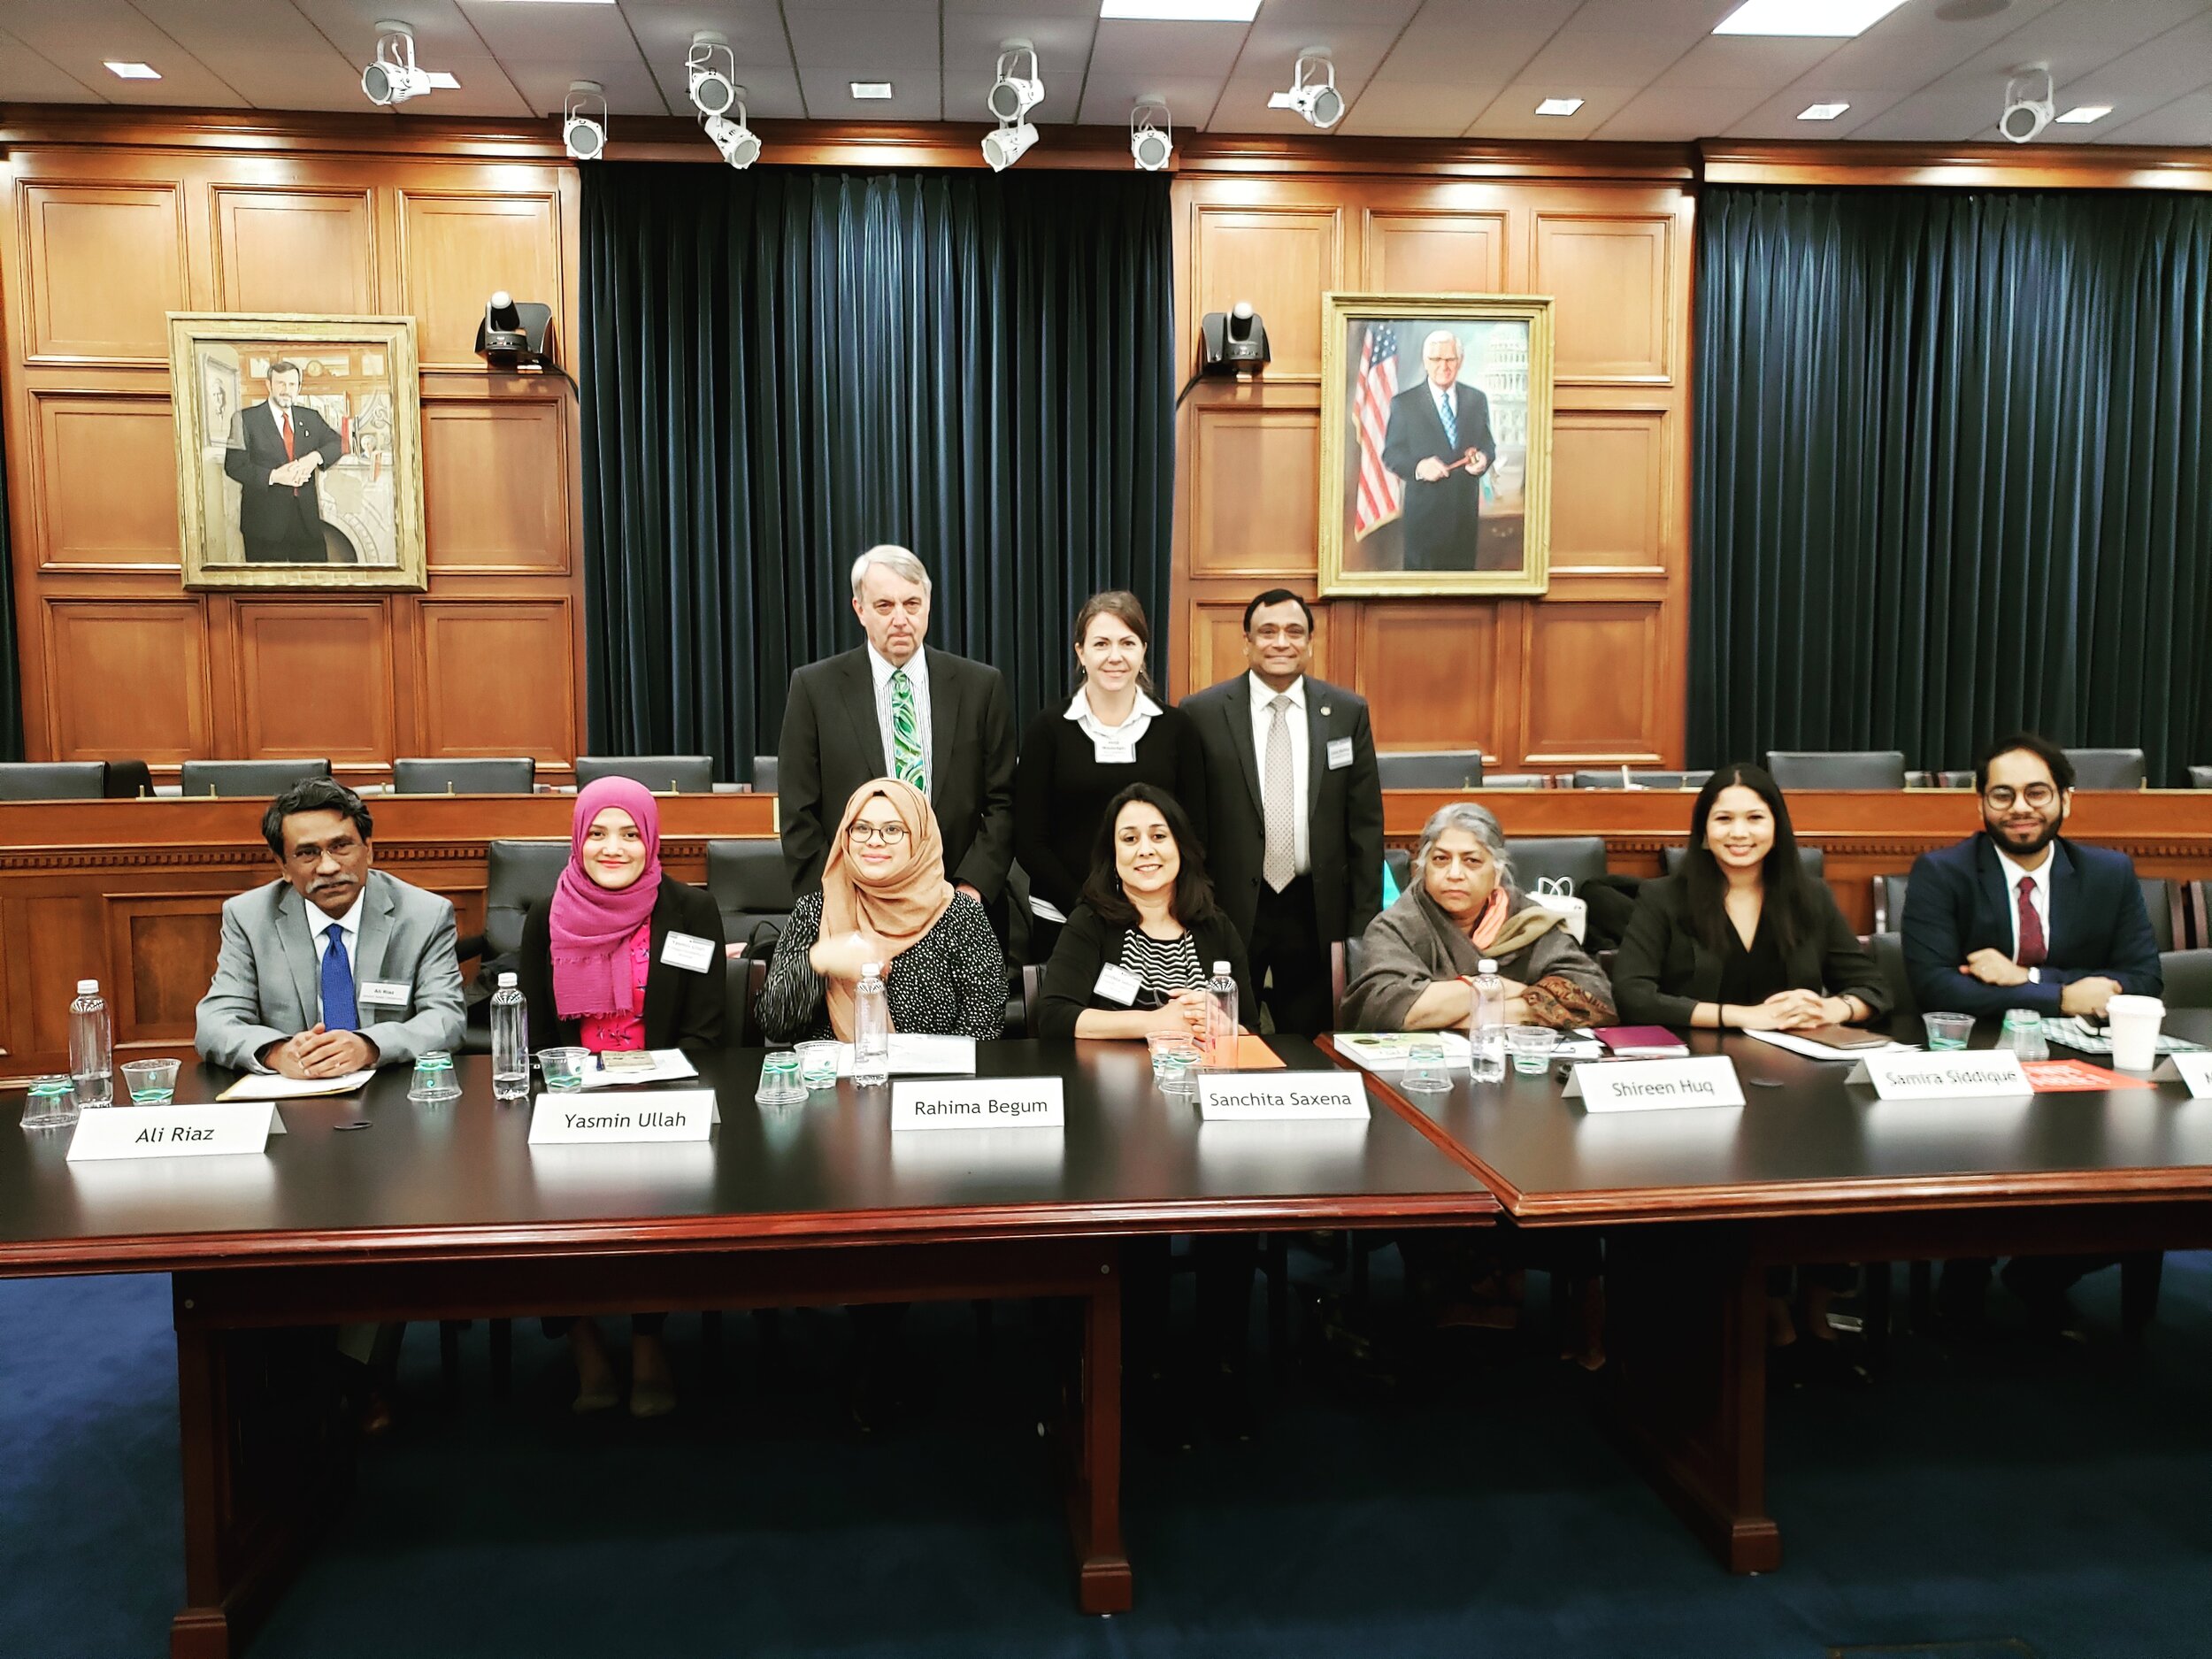 With an international delegation to discuss the Rohingya refugee crisis, Capitol Building, Washington DC, February 2020